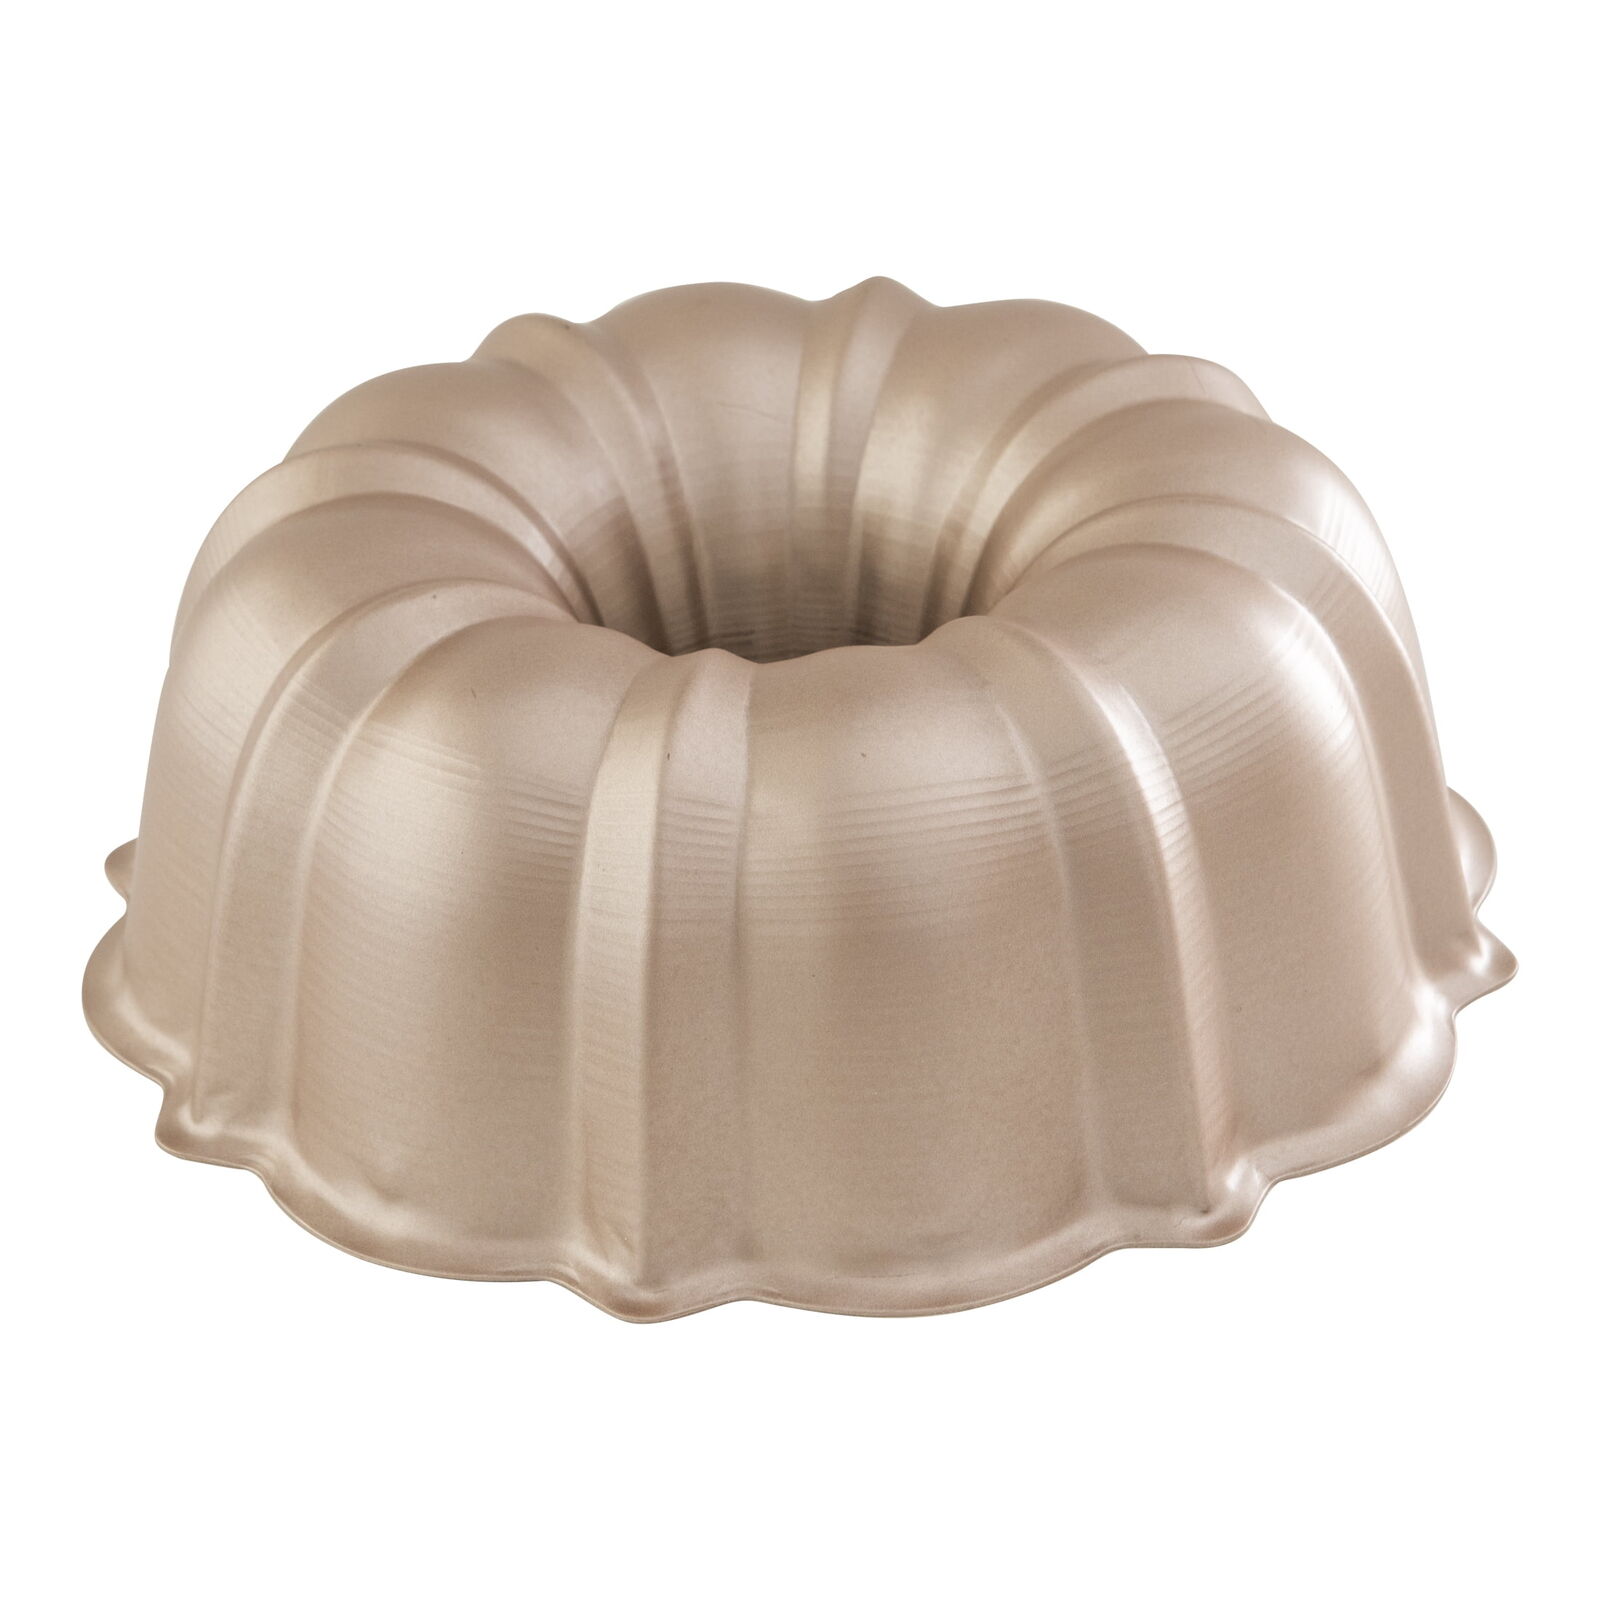 NEW Formed Aluminum Rose Gold Classic Bundt Pan,12 Cup, 10.3\